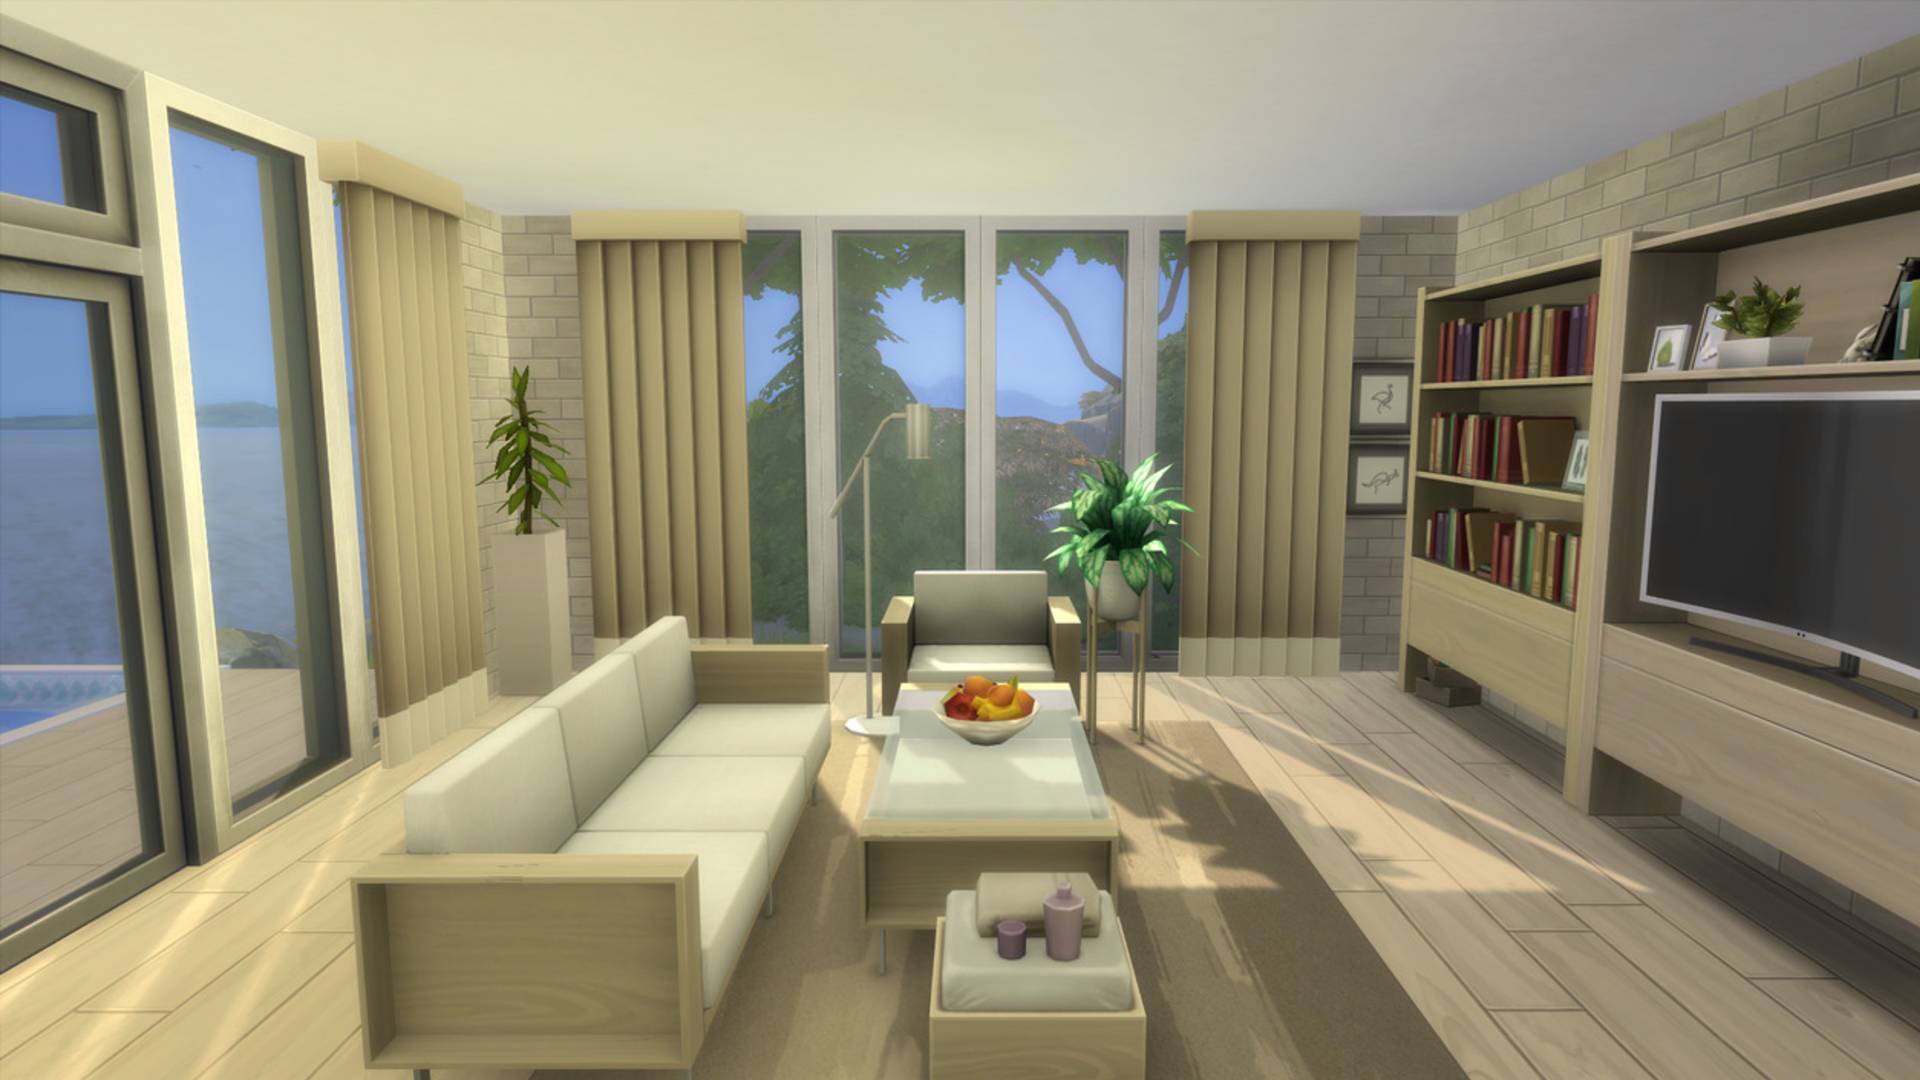 Sims 4 CC: A stylish, minimalist off-white living room, with a shelving unit holding books and a large television.